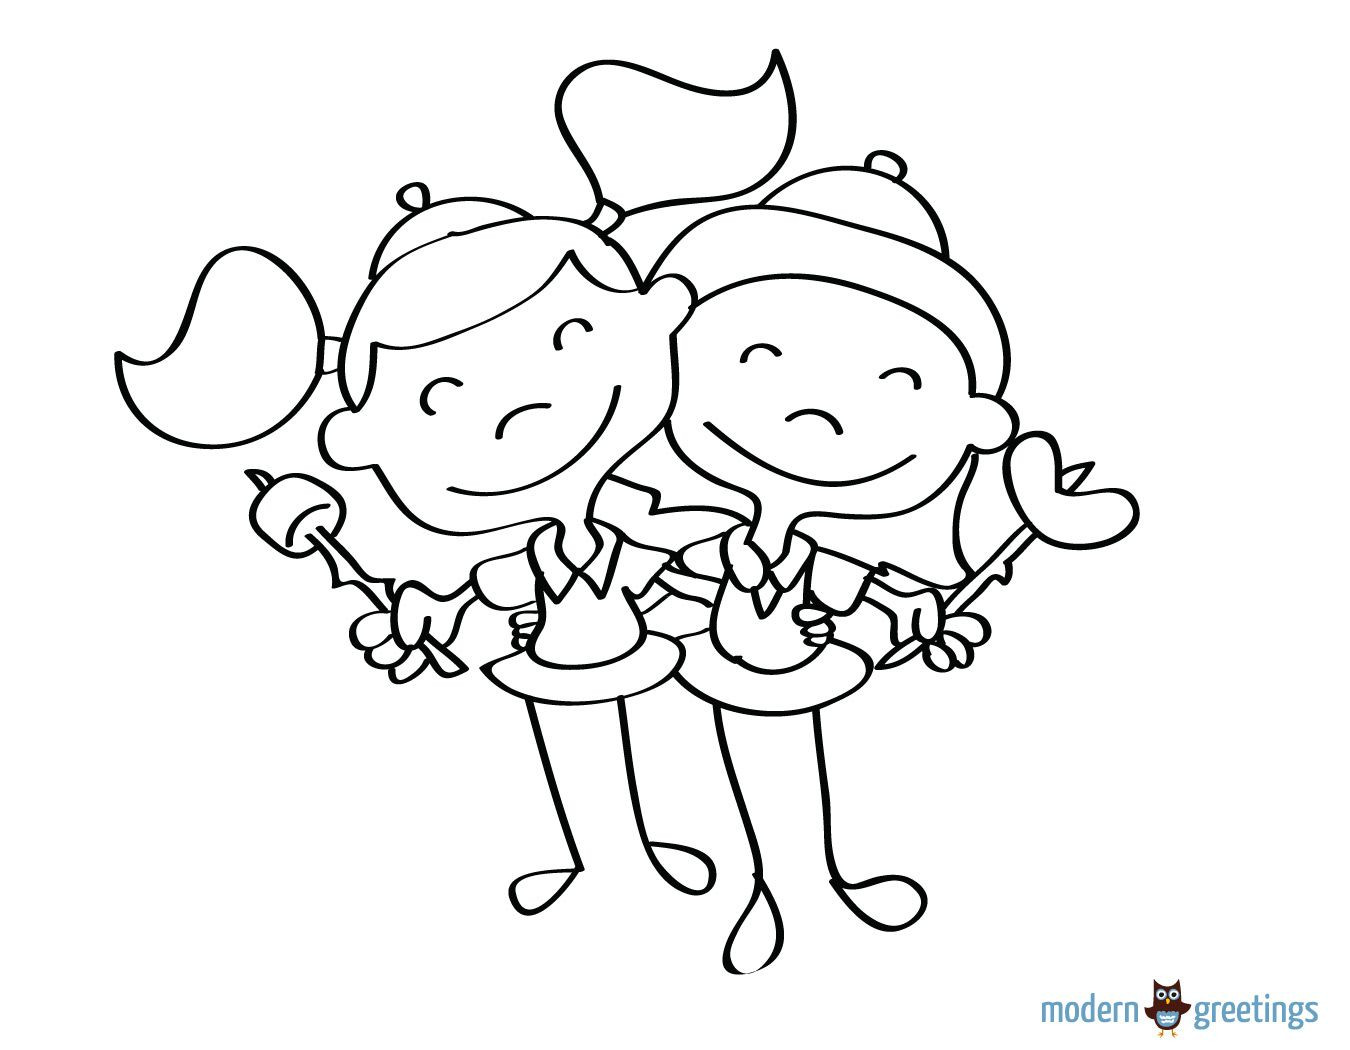 Girl Scout Brownies Coloring Pages
 Brownie girl scouts coloring pages Coloring Pages